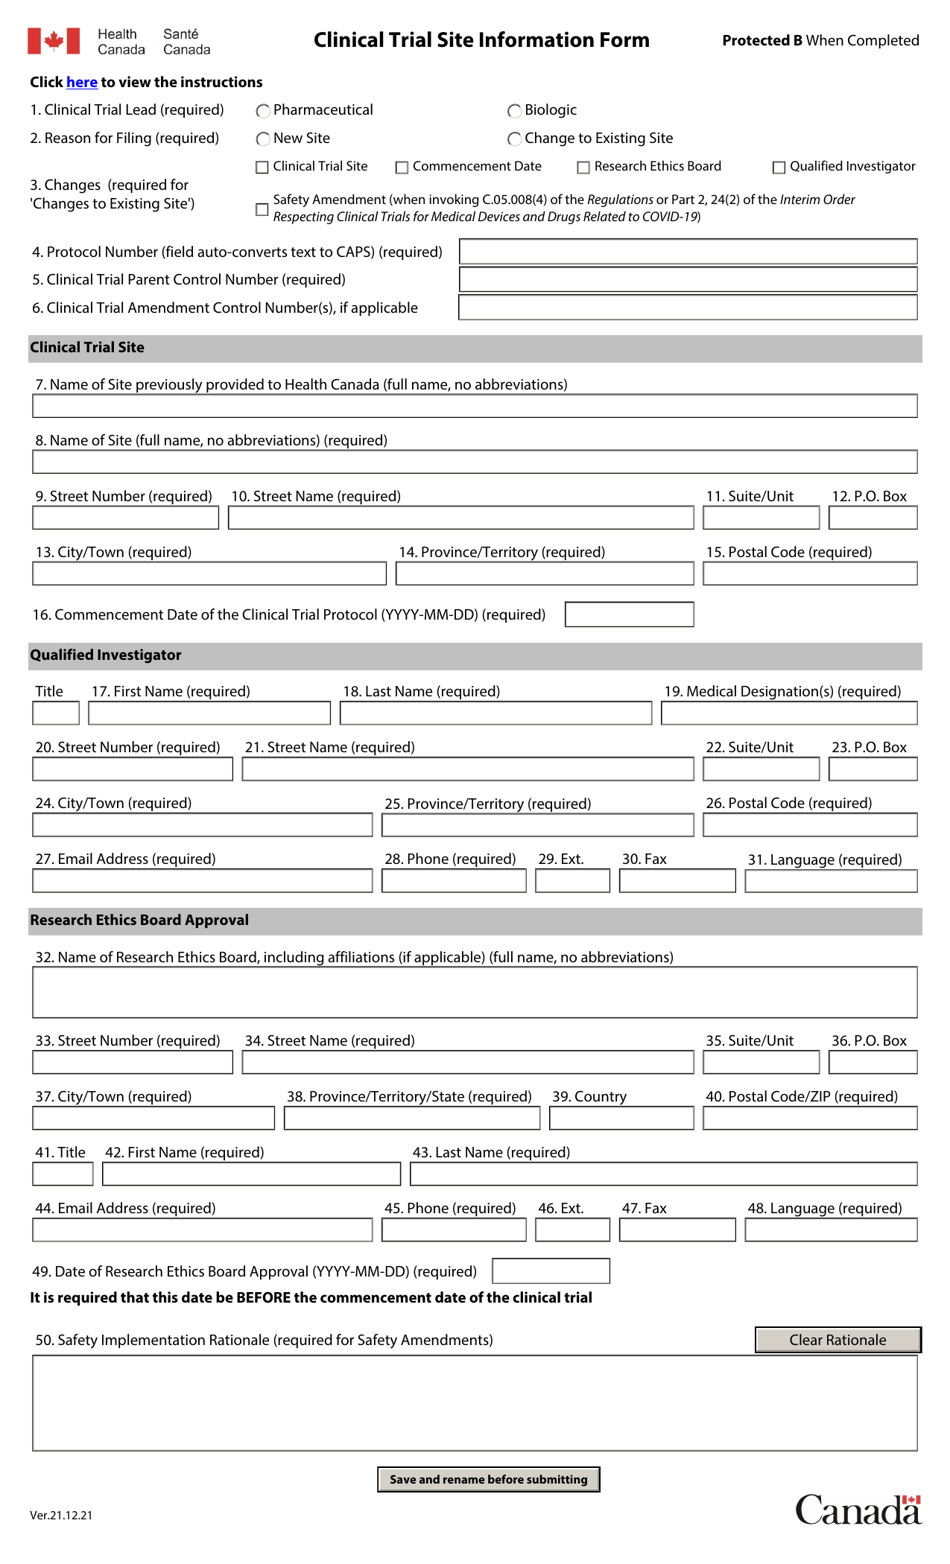 Clinical Trial Site Information Form - Canada, Page 1